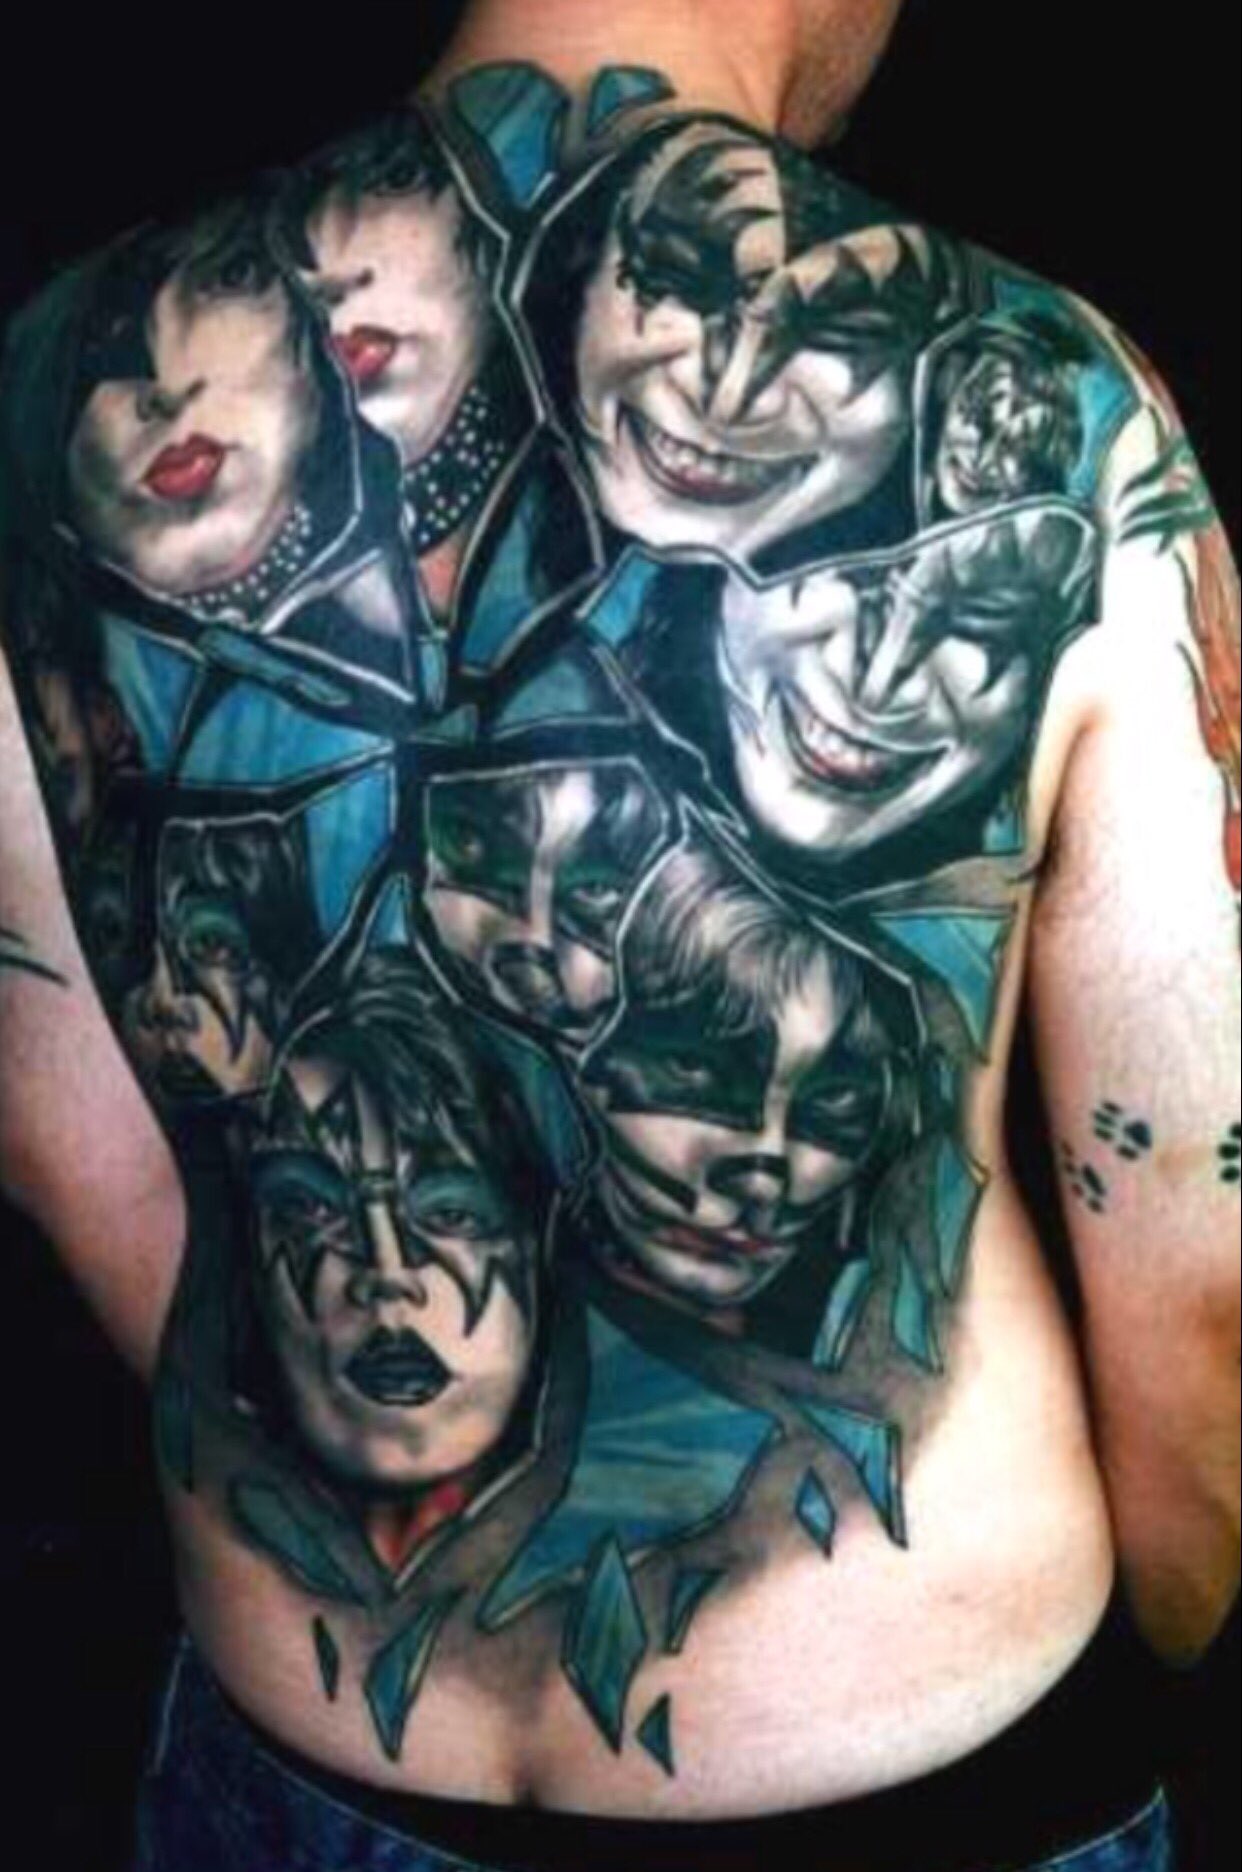 KISS  The KISS ARMY Rocks Thanks to Rob Cameron for sharing his amazing KISS  tattoos with us  Facebook